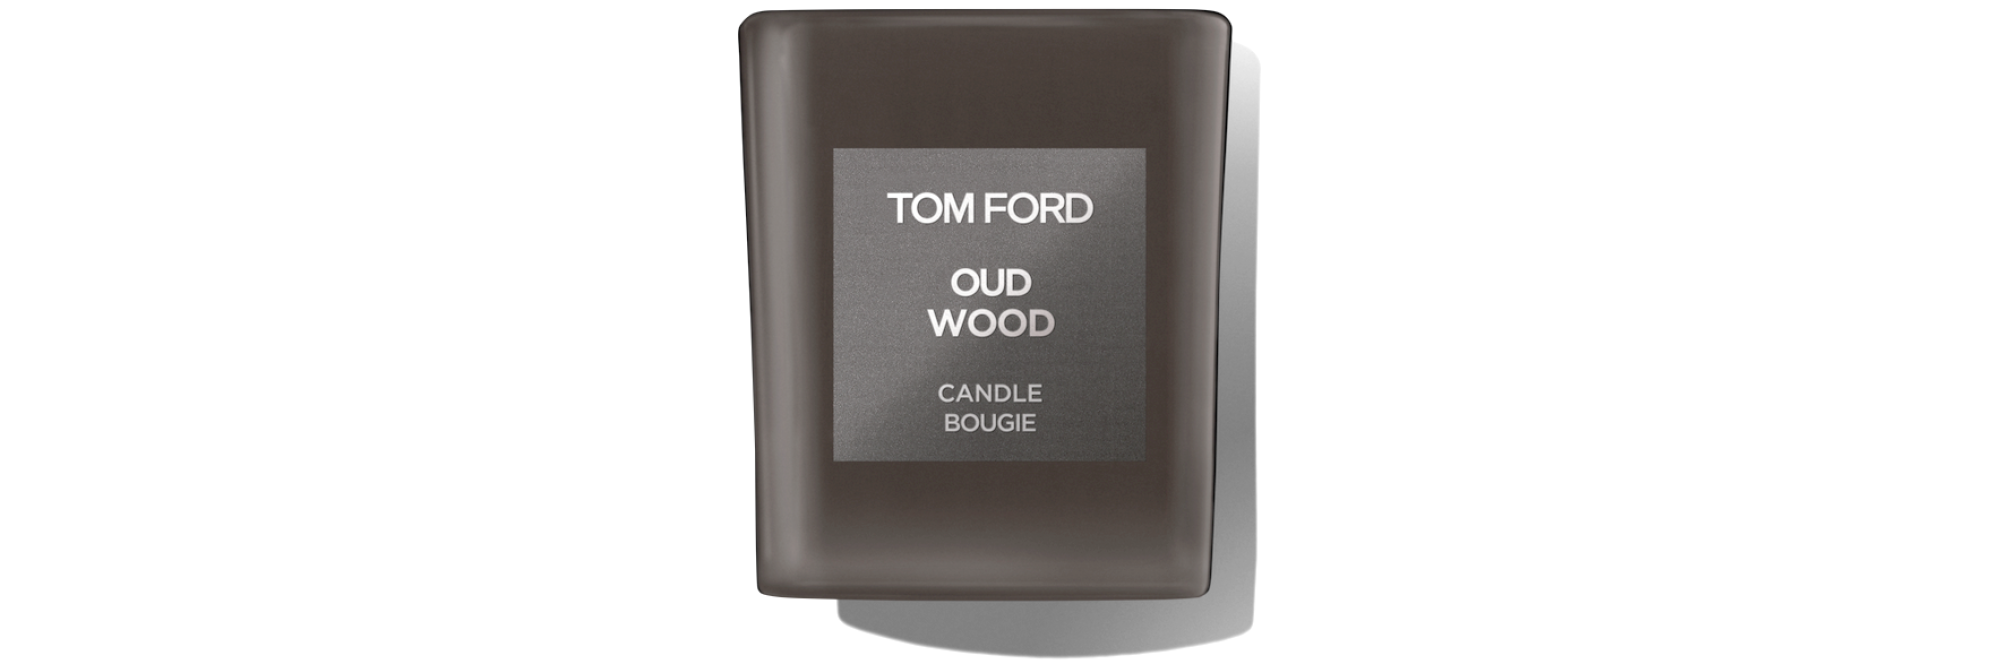 Tom Ford Oud Wooden Candle